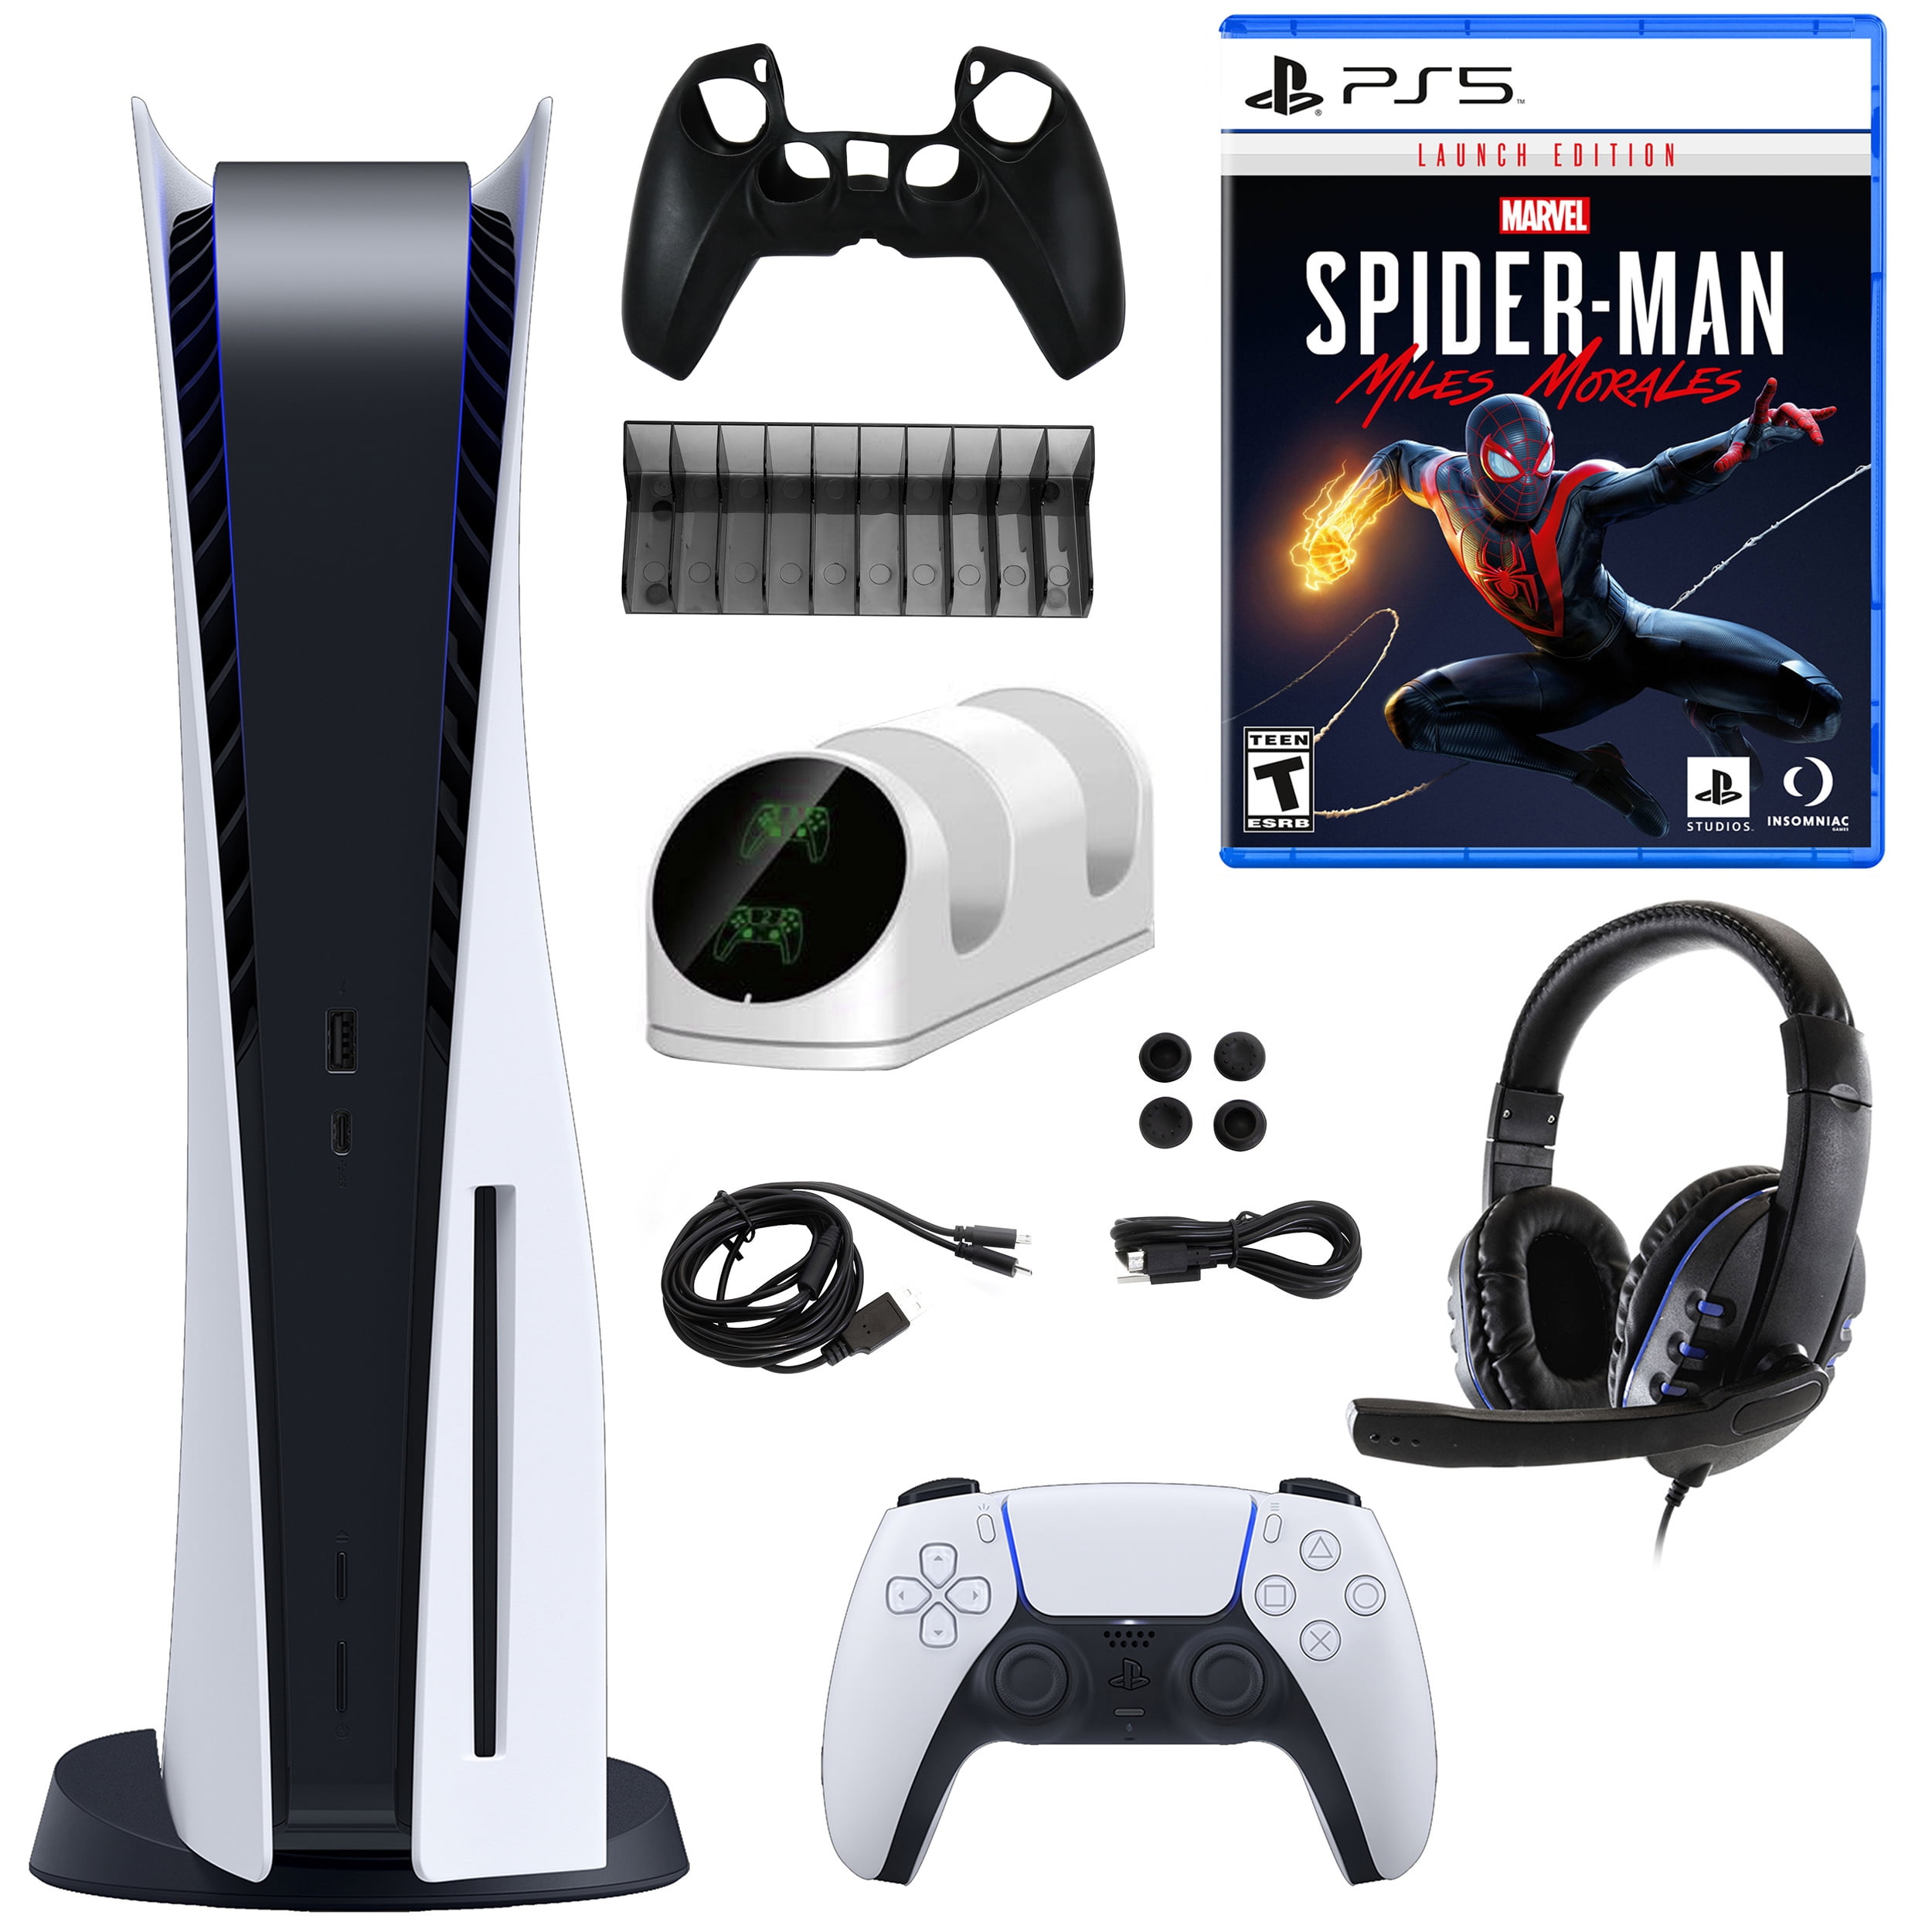 Spider-Man: Miles Morales Launch Edition - PlayStation 5